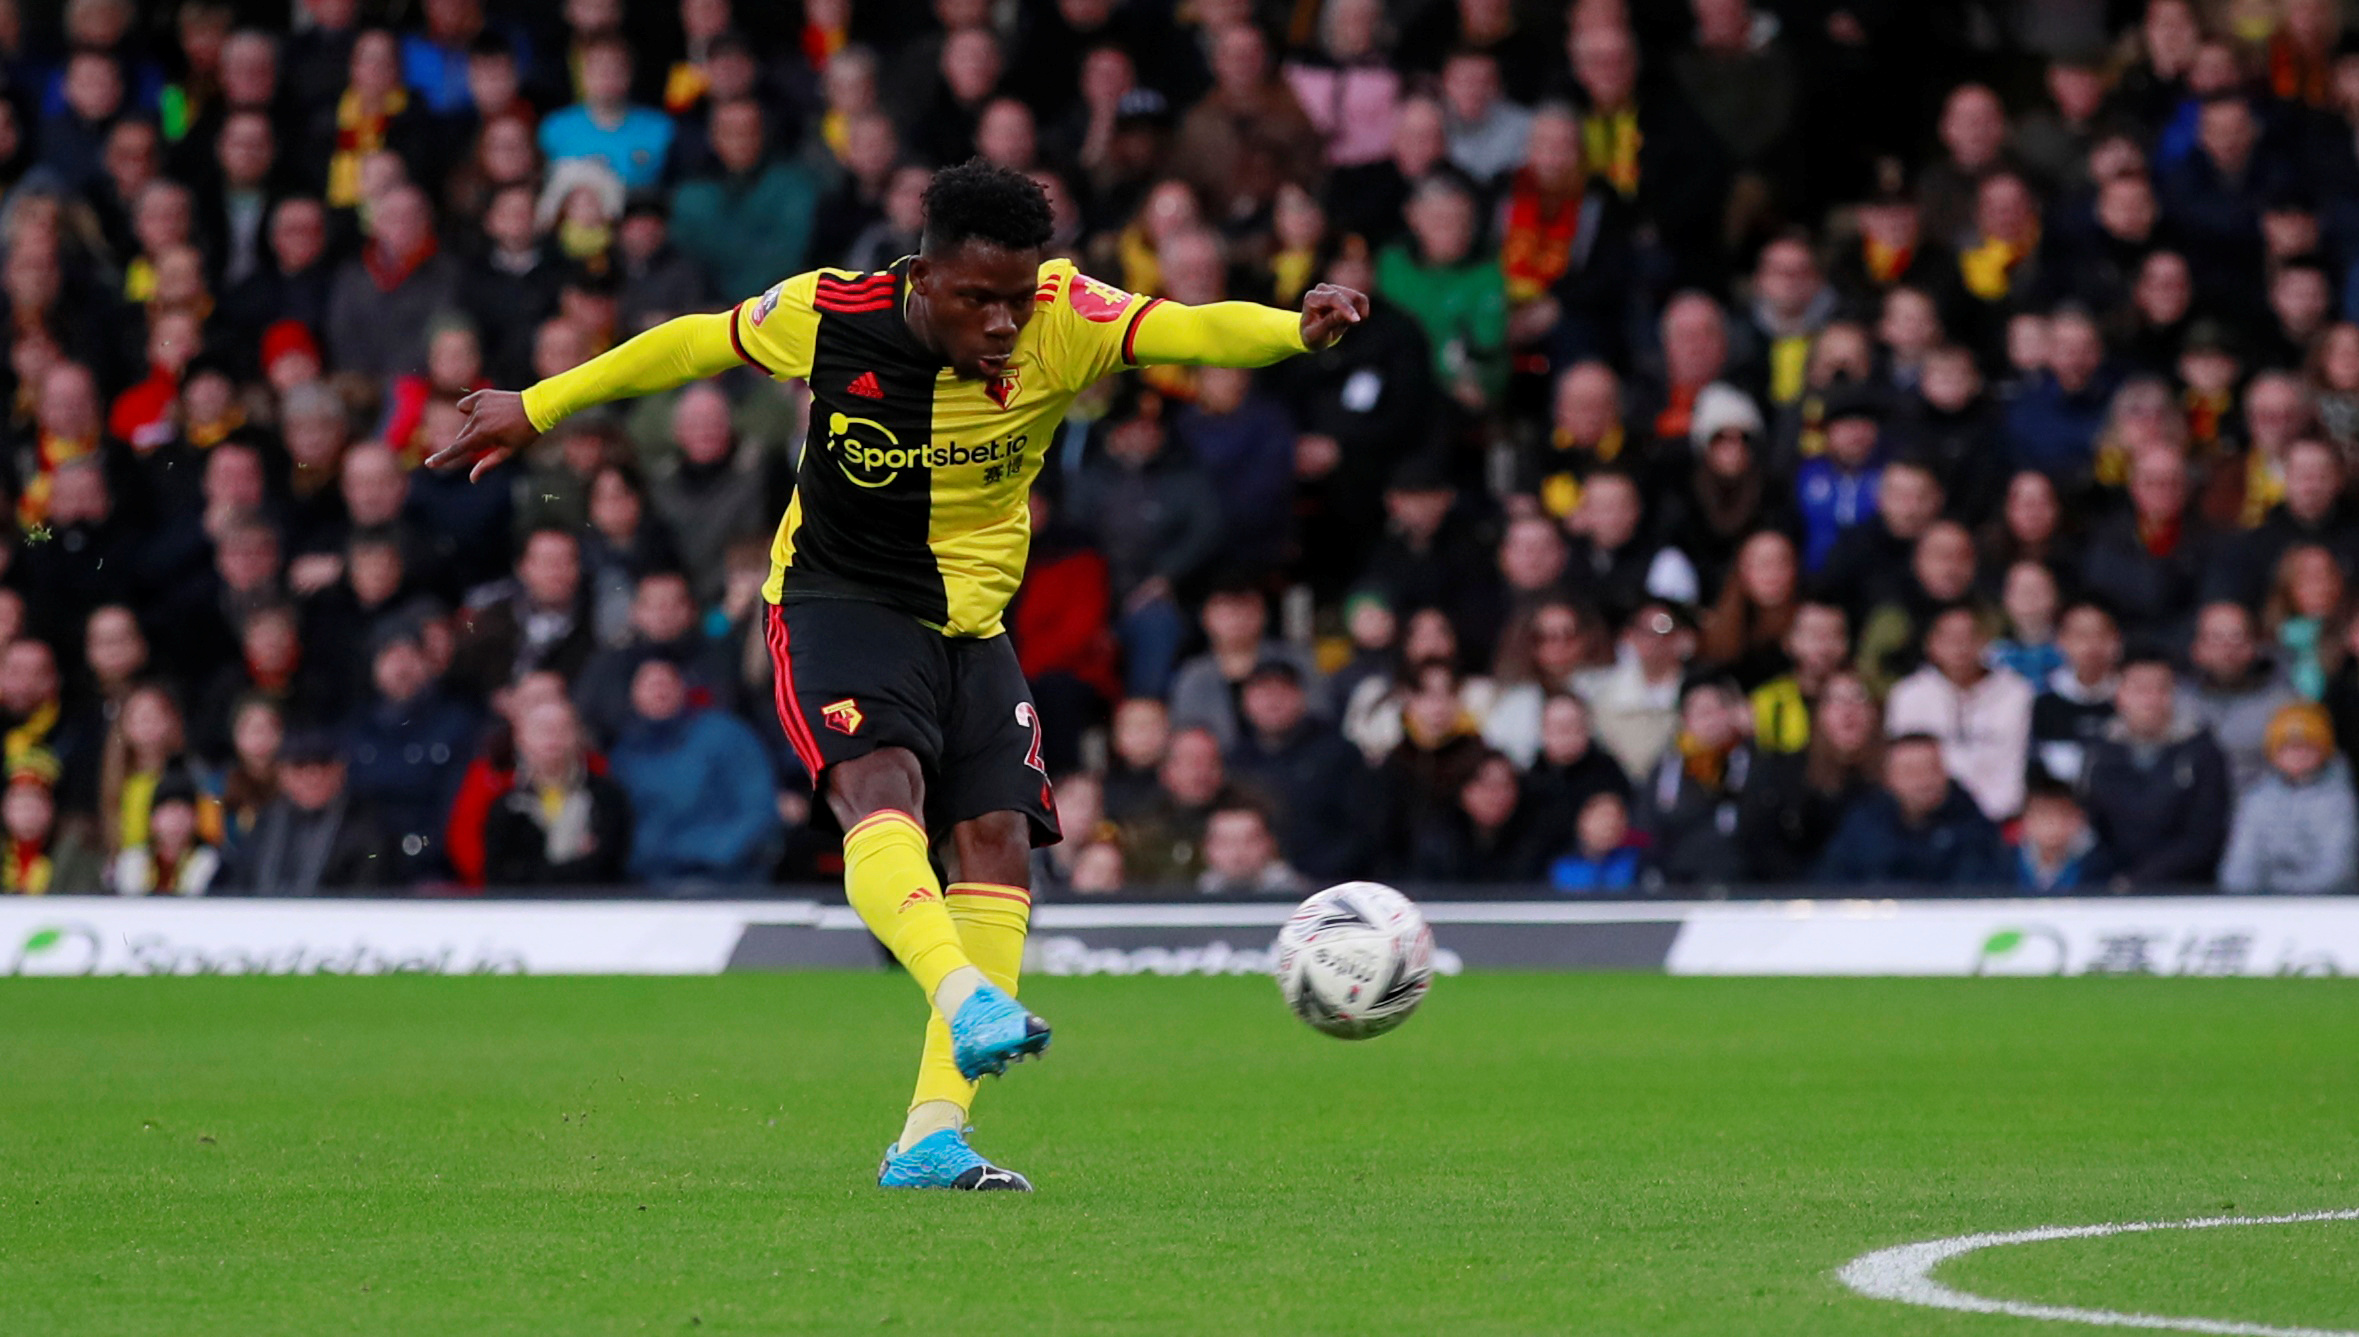 Edwards to give young players chance to thrive at Watford